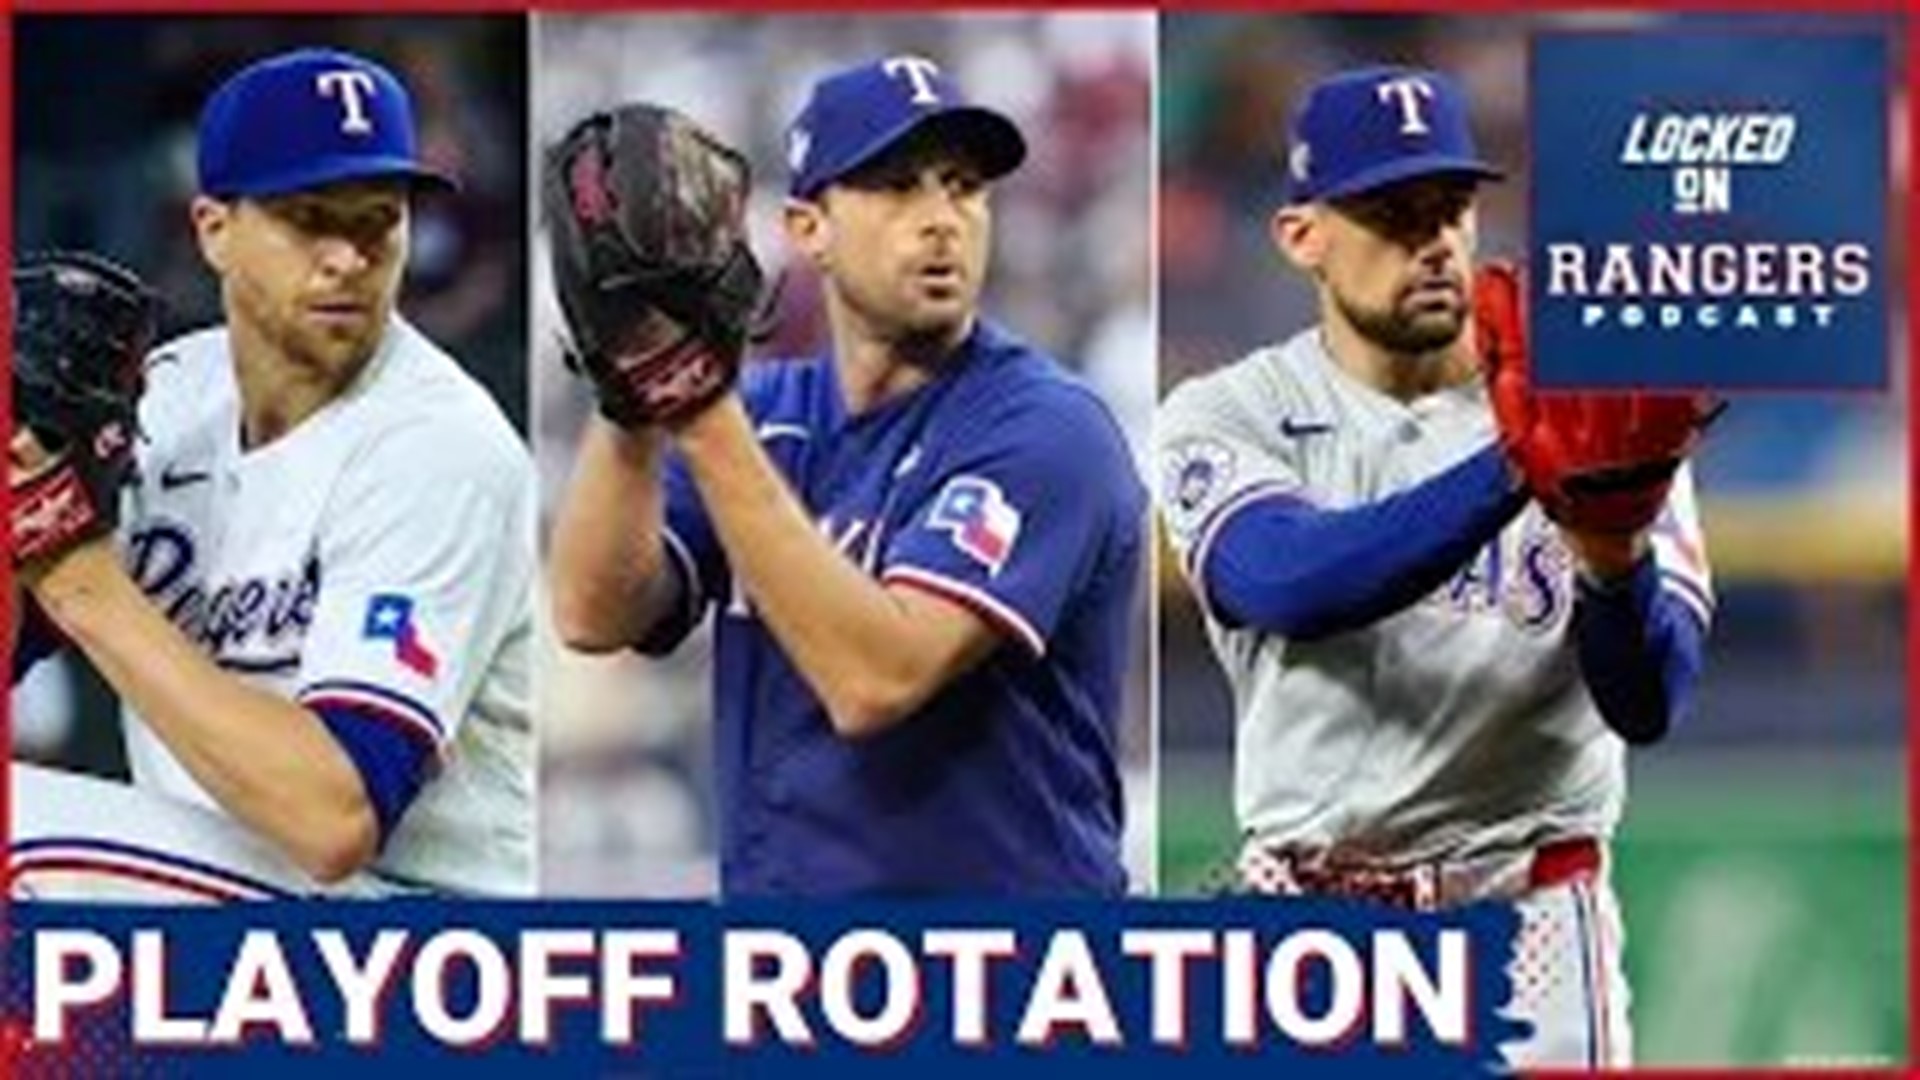 Texas Rangers lefty Cody Bradford has dominated in his first three starts of the season. A healthy rotation of Jacob deGrom, Max Scherzer, Nathan Eovaldi.